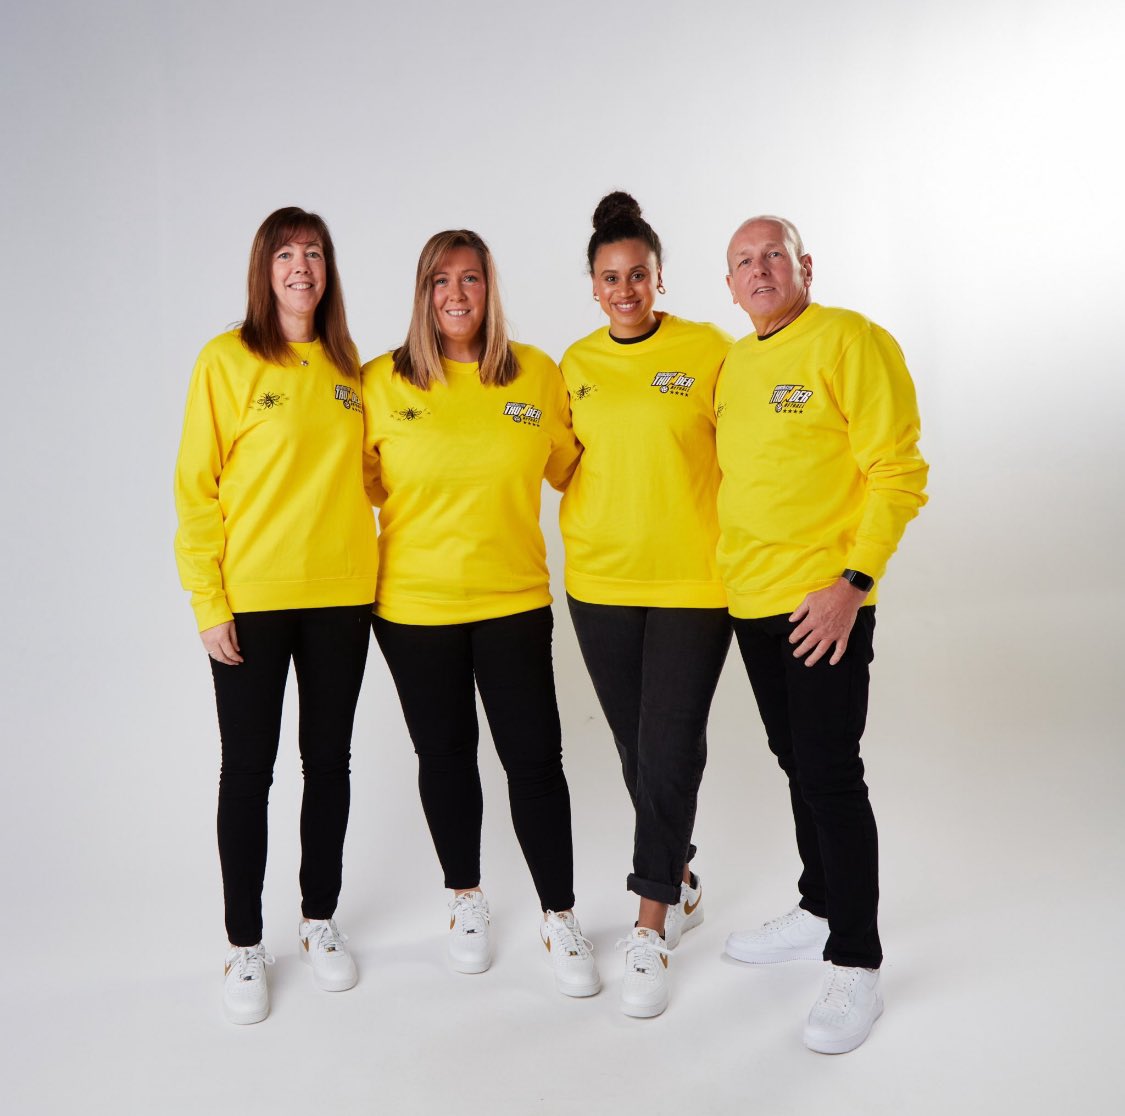 Wishing my favourite coaches @kjgreigy @GabsT70 @ljmalcolm1 and Jeeves @PhilT79 a massive good luck this weekend and for the season ‘Let’s go @thundernetball 💛